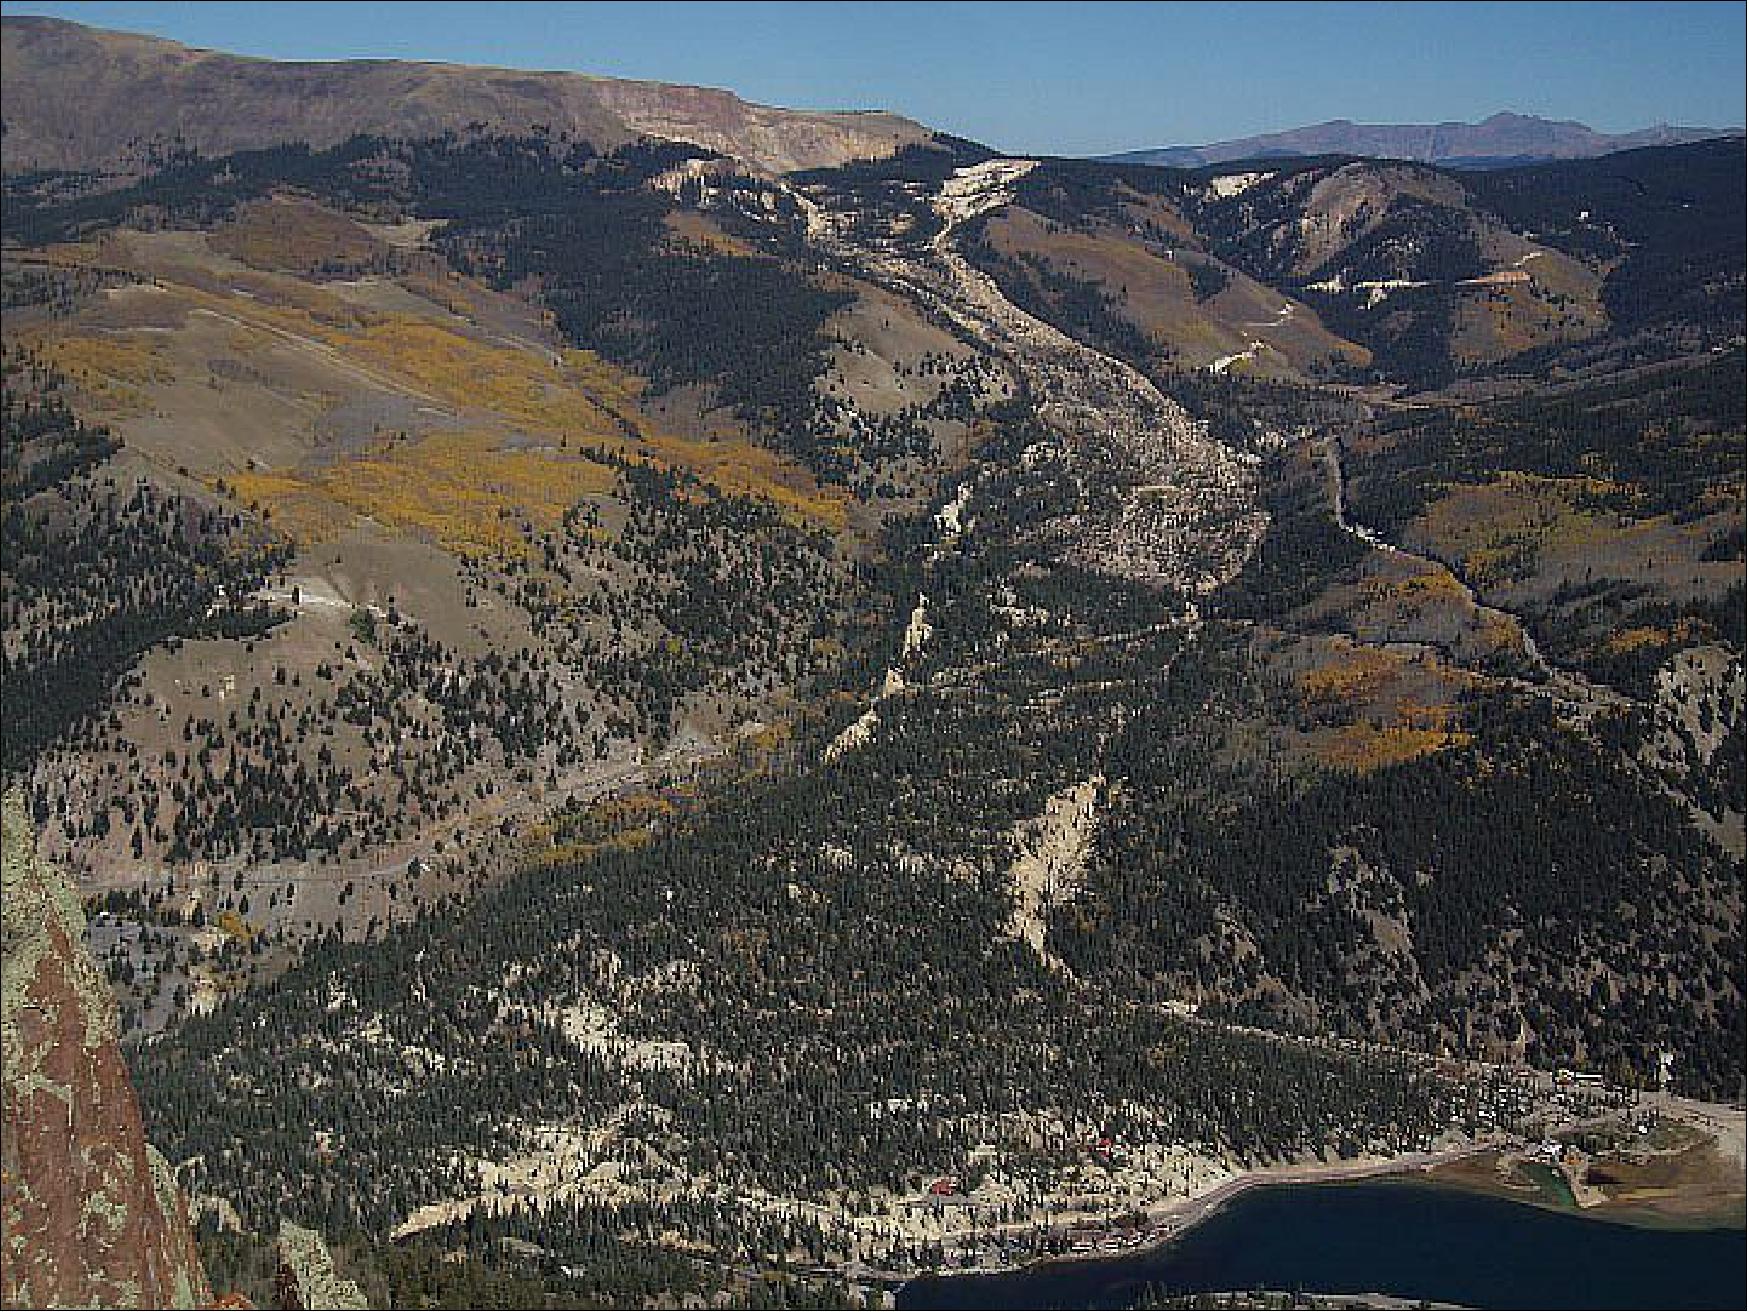 Figure 9: The photograph shows the Slumgullion Landslide as observed by Bill Schulz of USGS (image credit: NASA Earth Observatory)